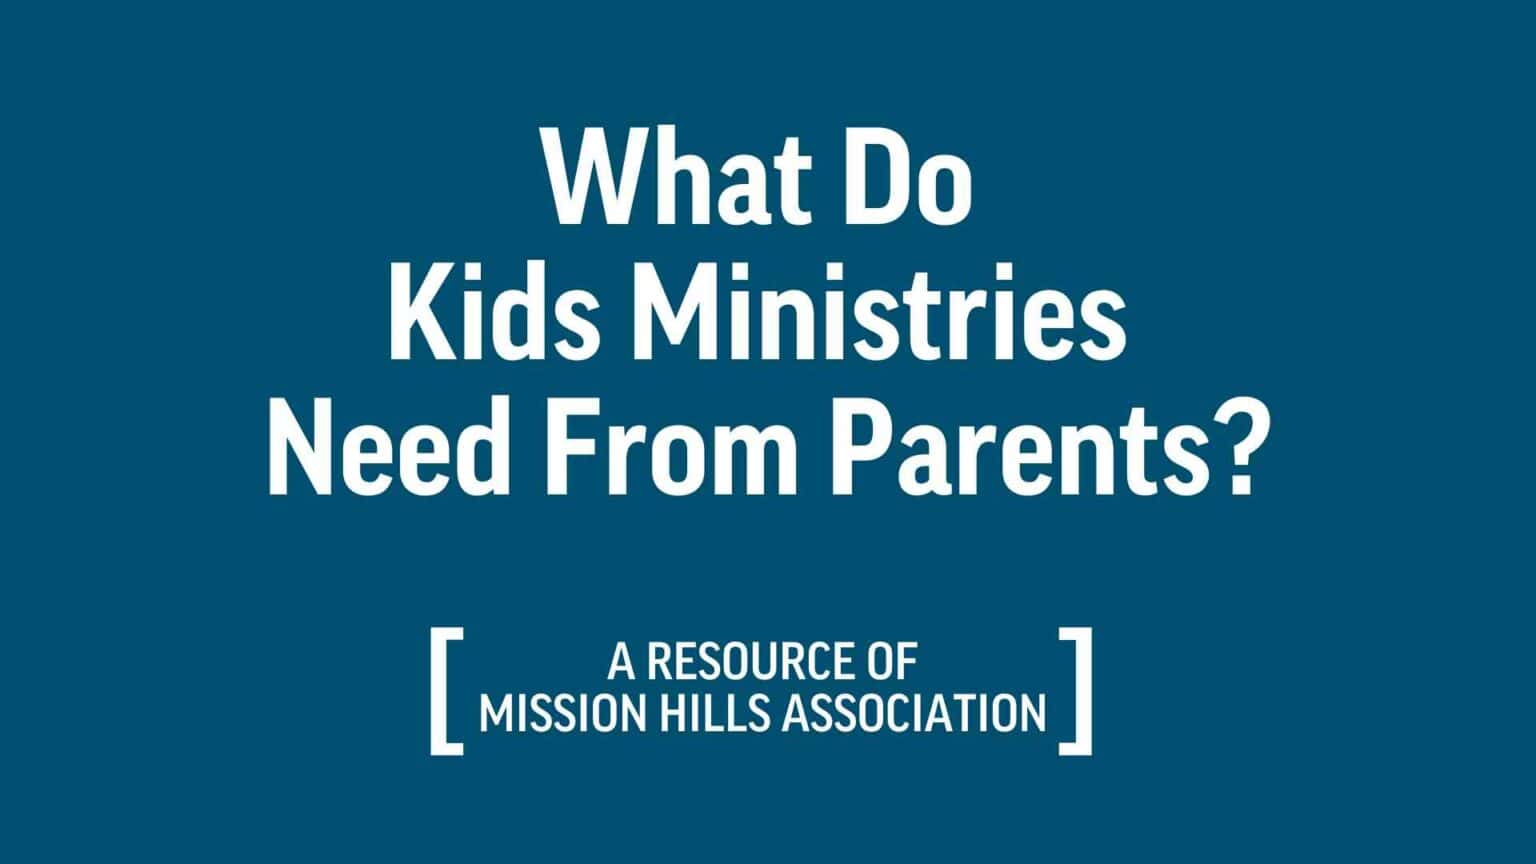 What Do Kids Ministries Need From Parents?